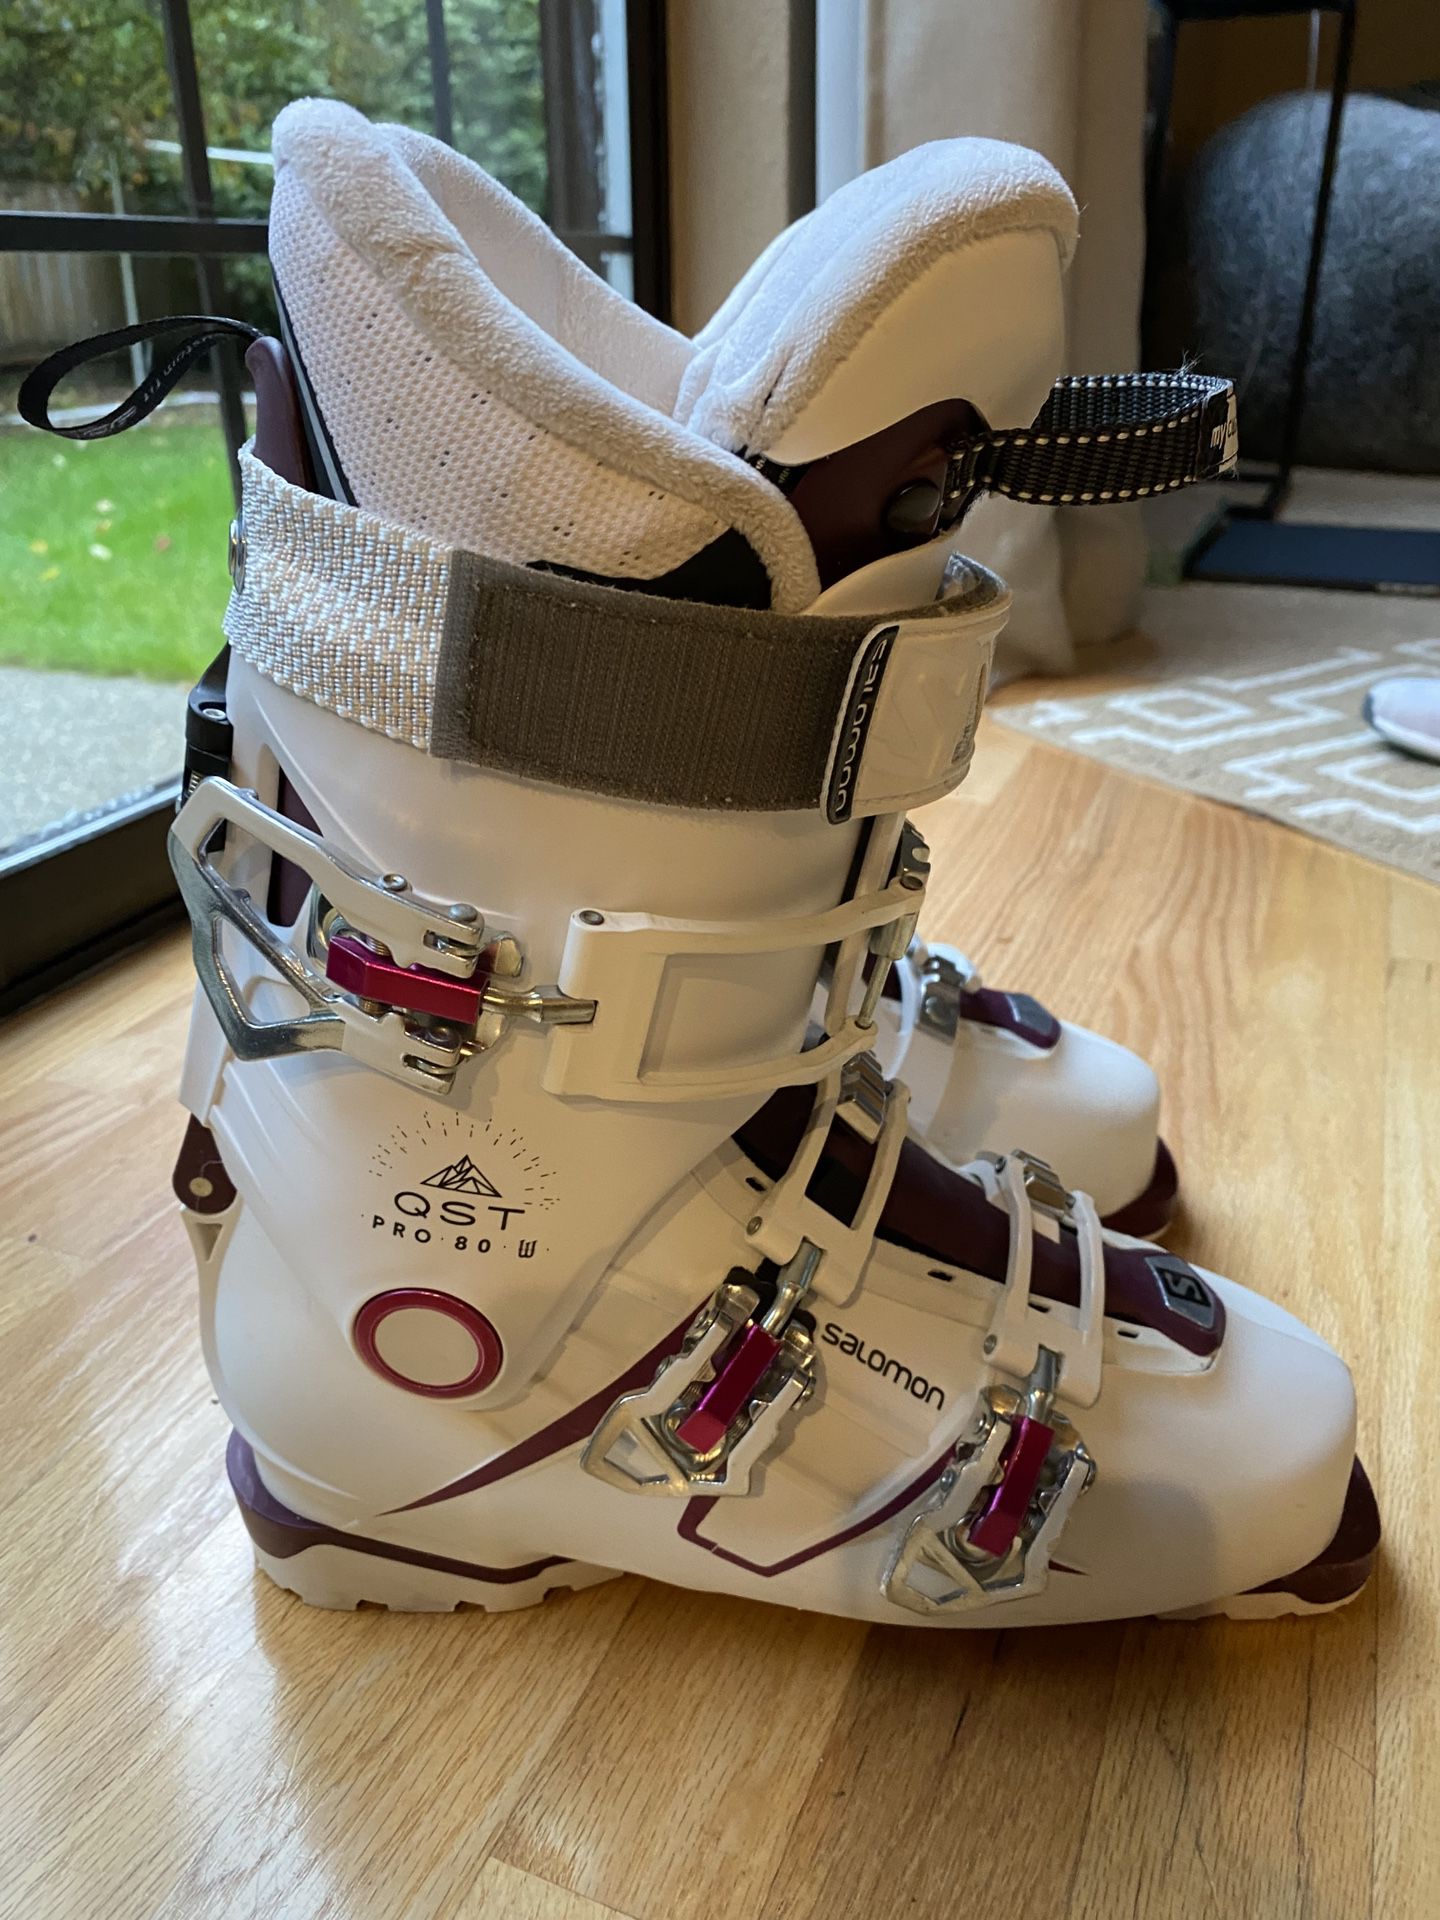 Salomon Quest Pro 80 Ski Boots Excellent for Sale in Gig Harbor, WA - OfferUp